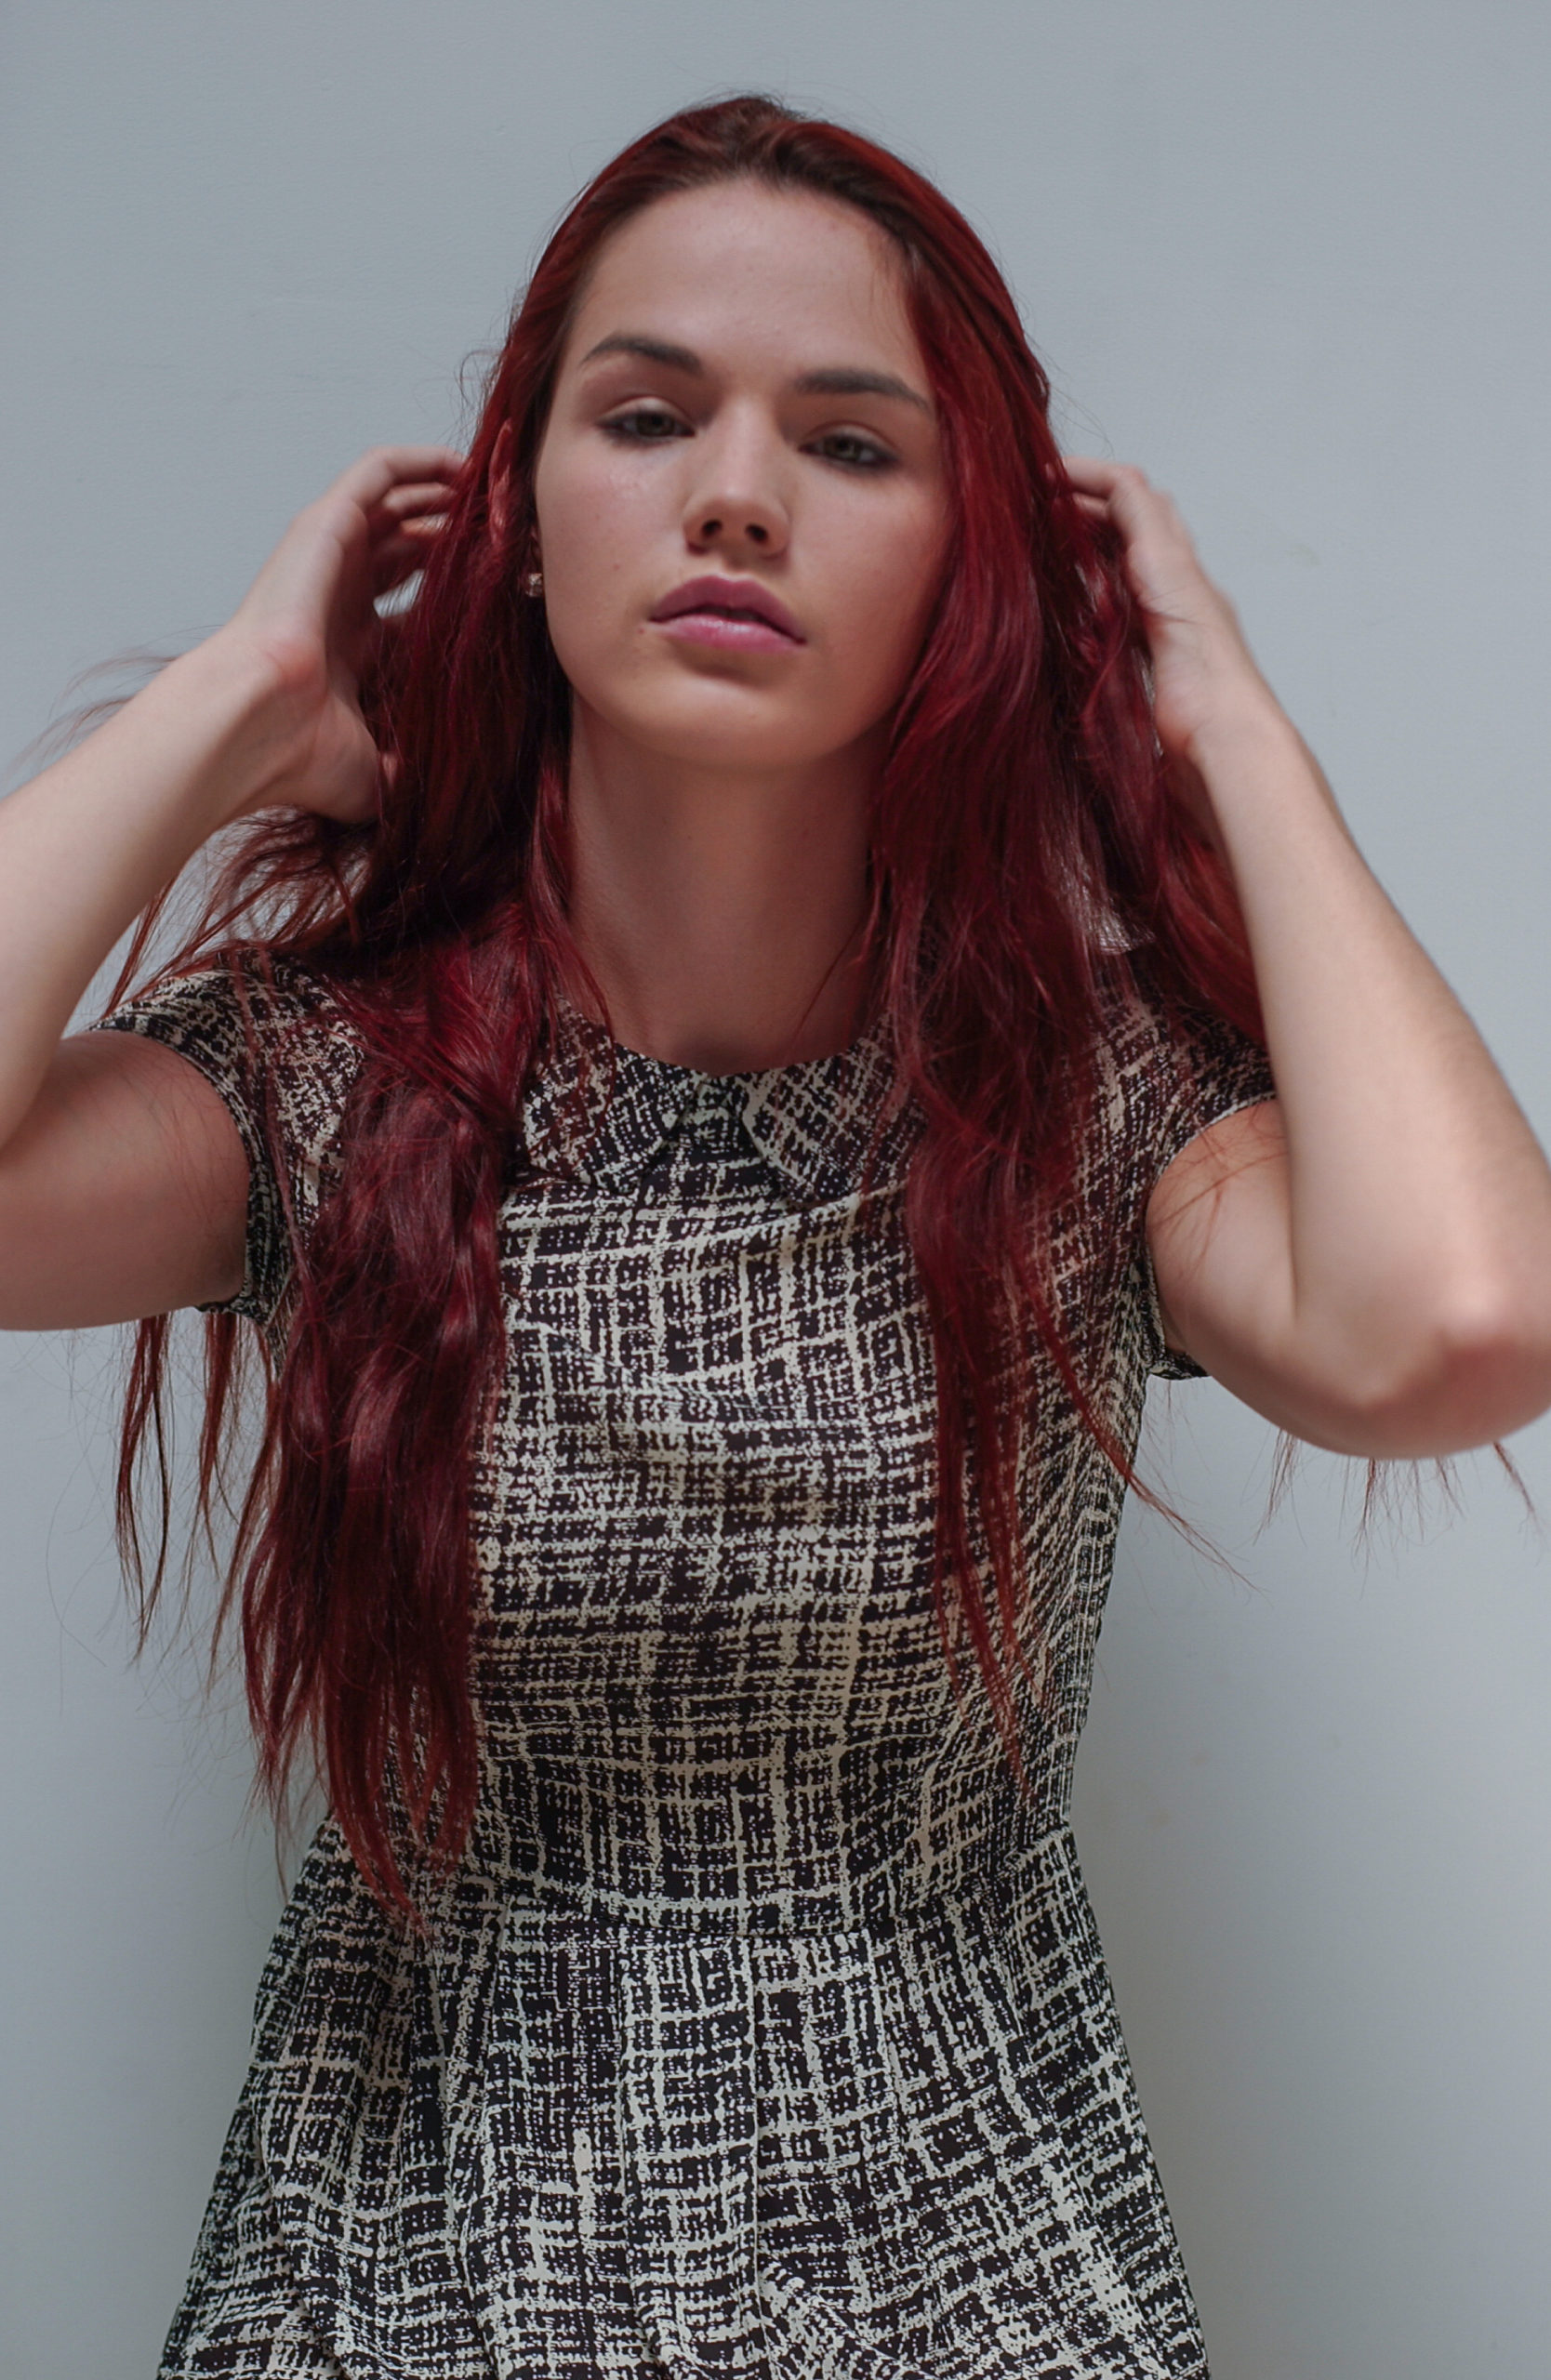 red haired signed fashion model at mojokiss.com